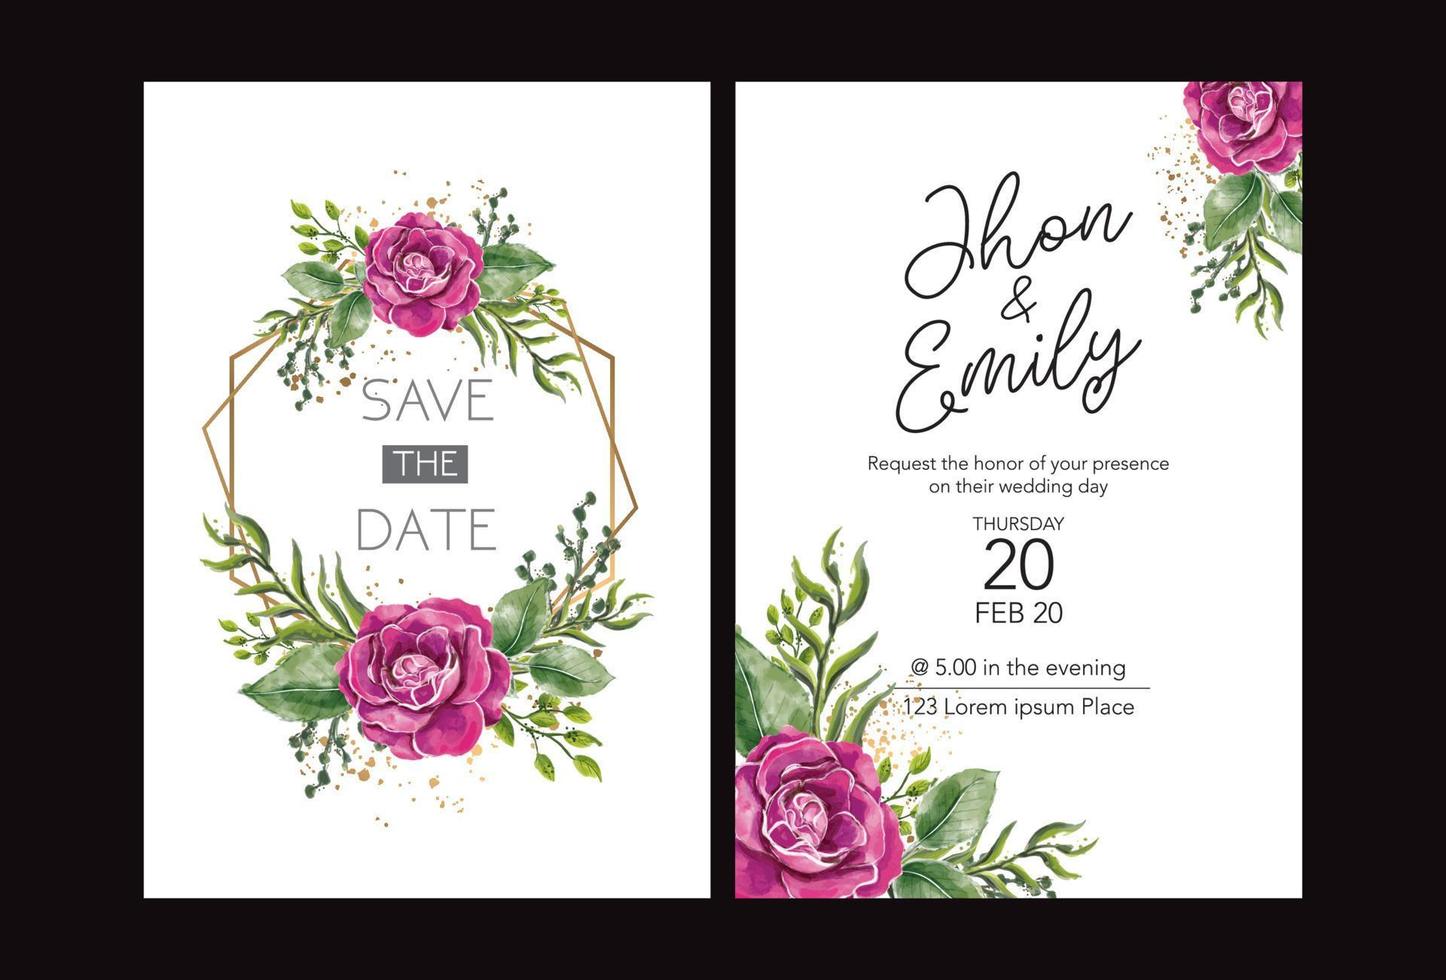 Wedding Invitation card templates with beautiful watercolor red rose flower vector